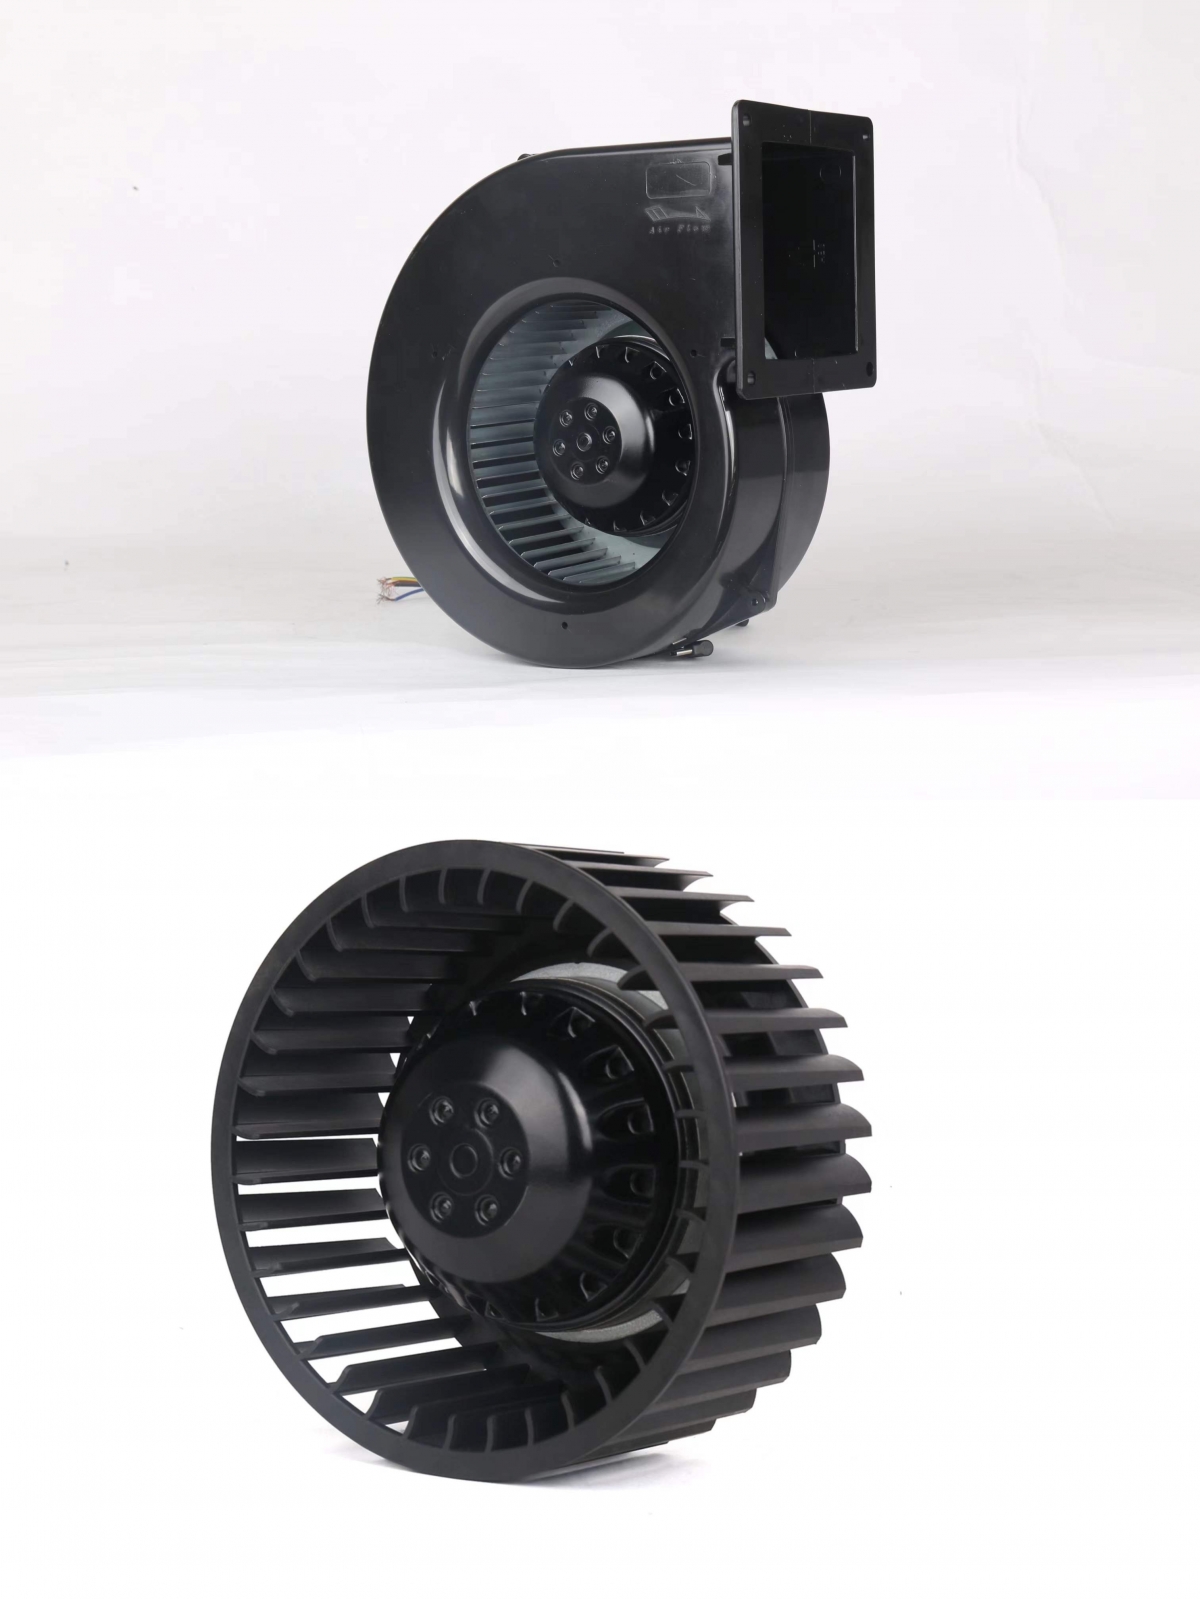 ETL centrifugal fans and Inline duct fans in Changzhou ,China .-SUNLIGHT BLOWER,Centrifugal Fans, Inline Fans,Motors,Backward curved centrifugal fans ,Forward curved centrifugal fans ,inlet fans, EC fans